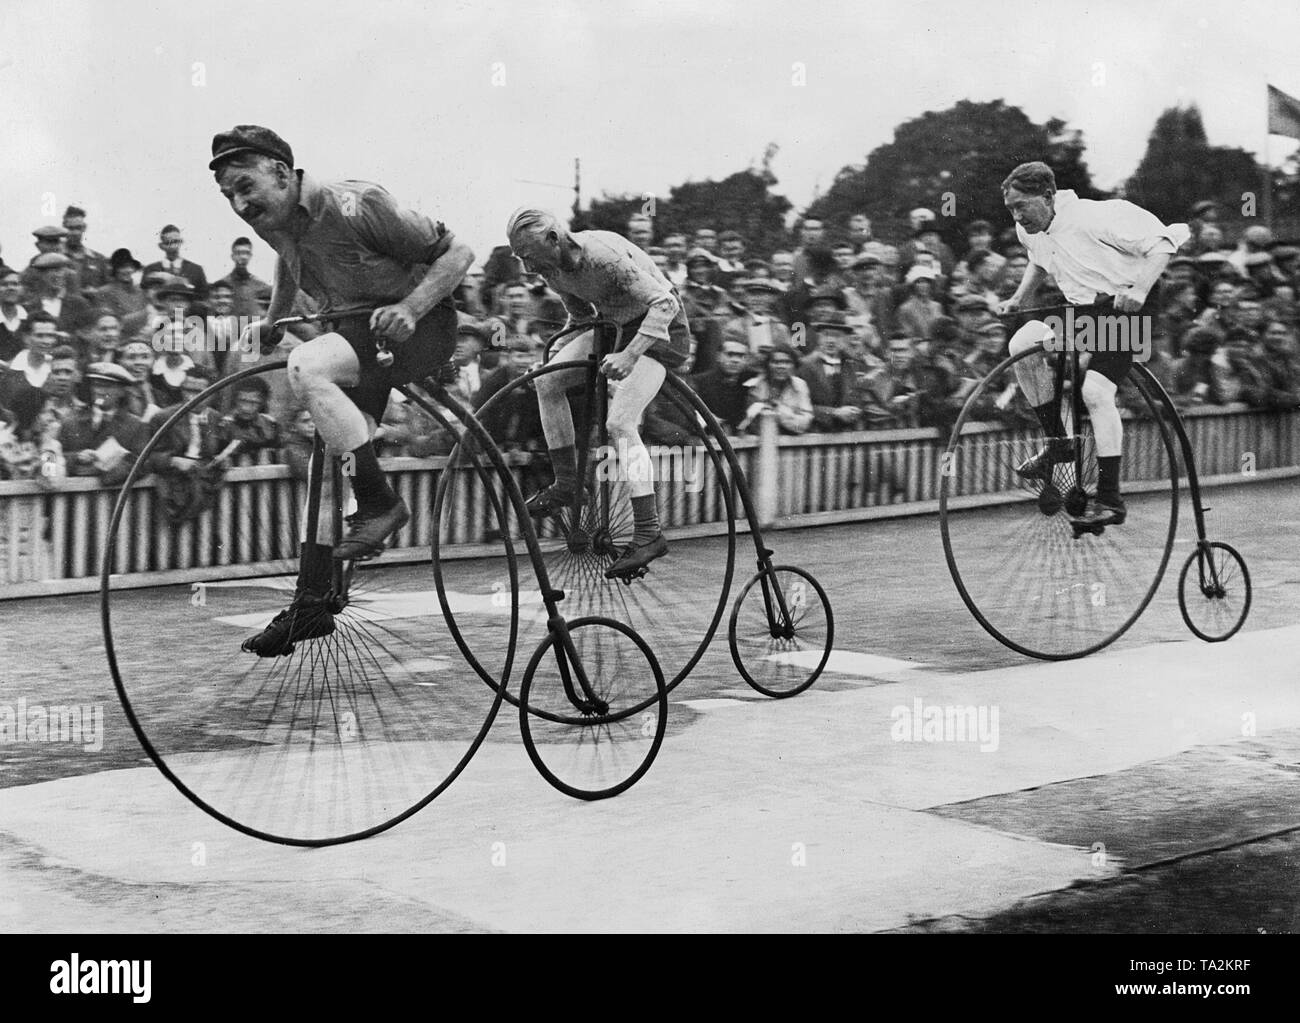 The racers start the competition during the 'Penny Farthing Race' at the Herne Hill Velodrome in London on September 10, 1932. Stock Photo